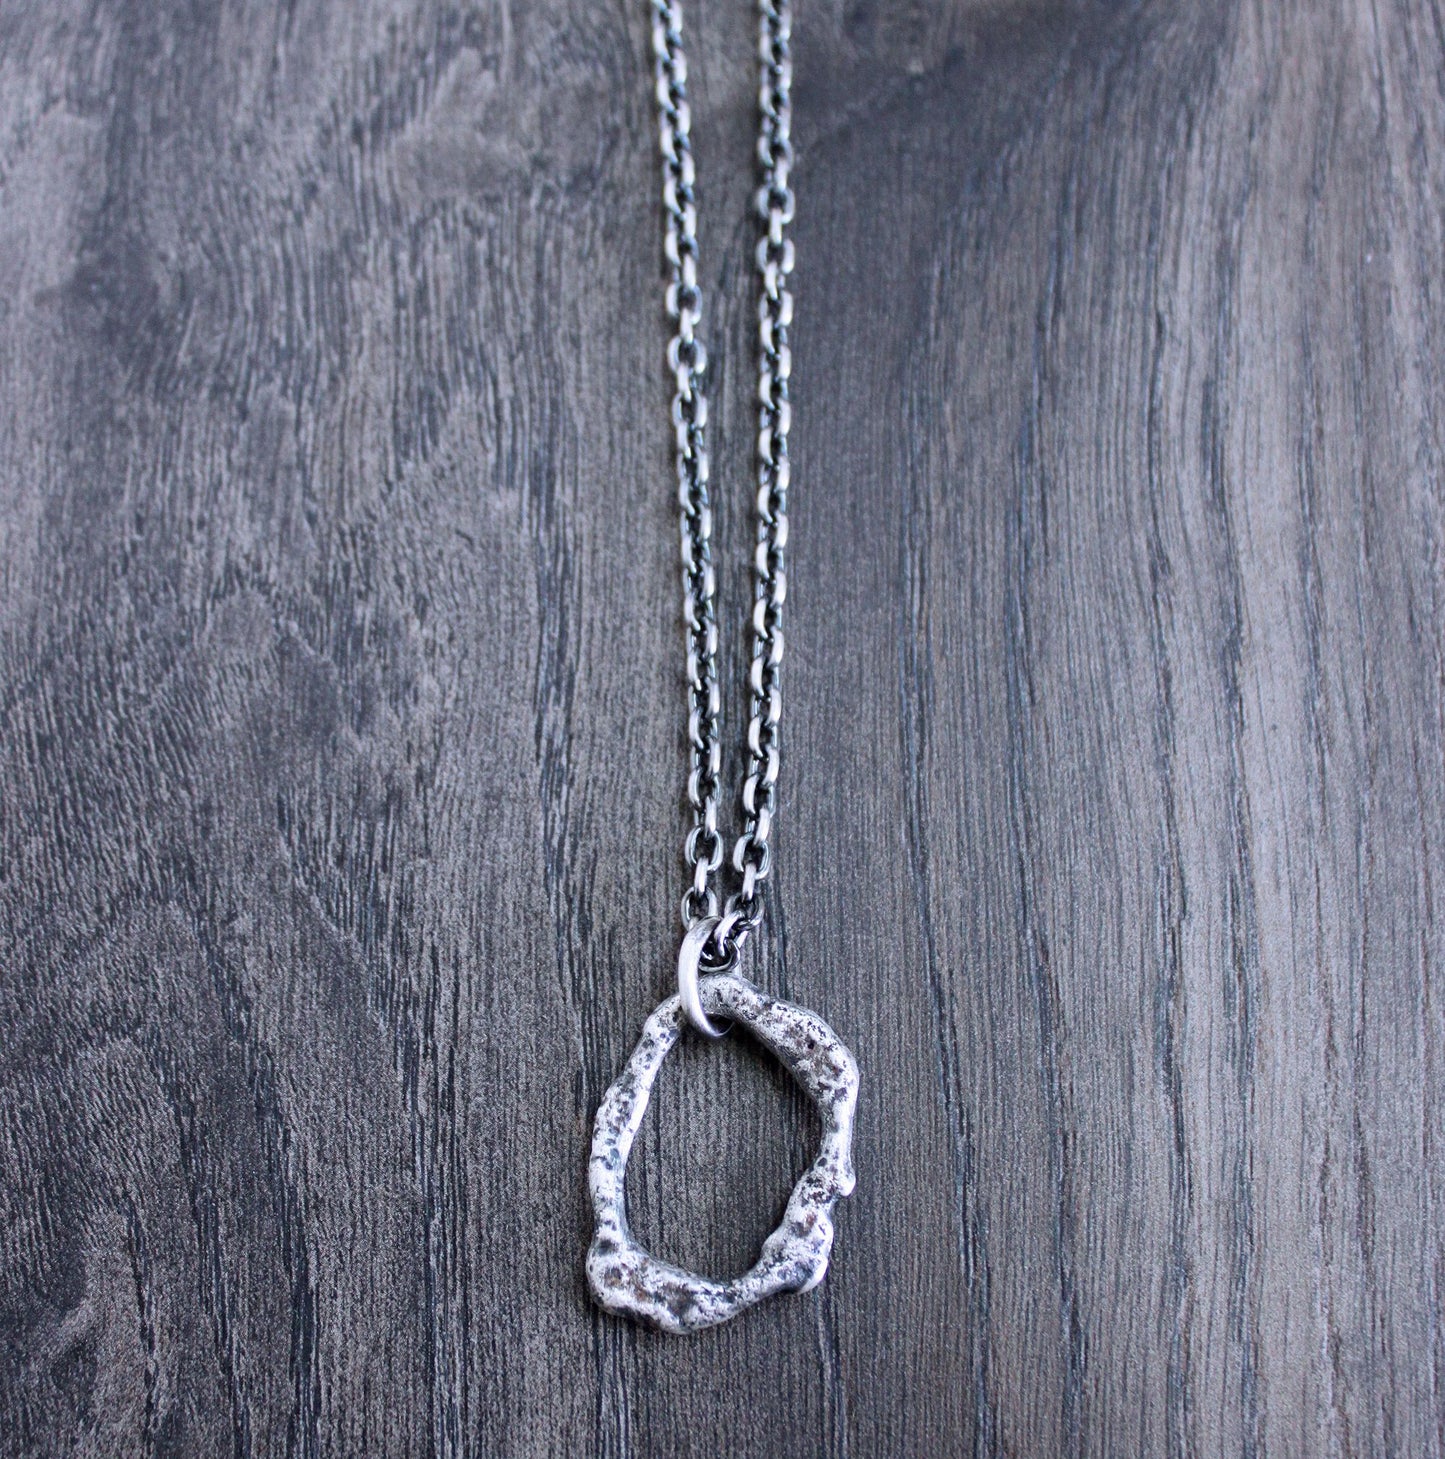 Men's Rugged Silver Pendant Necklace